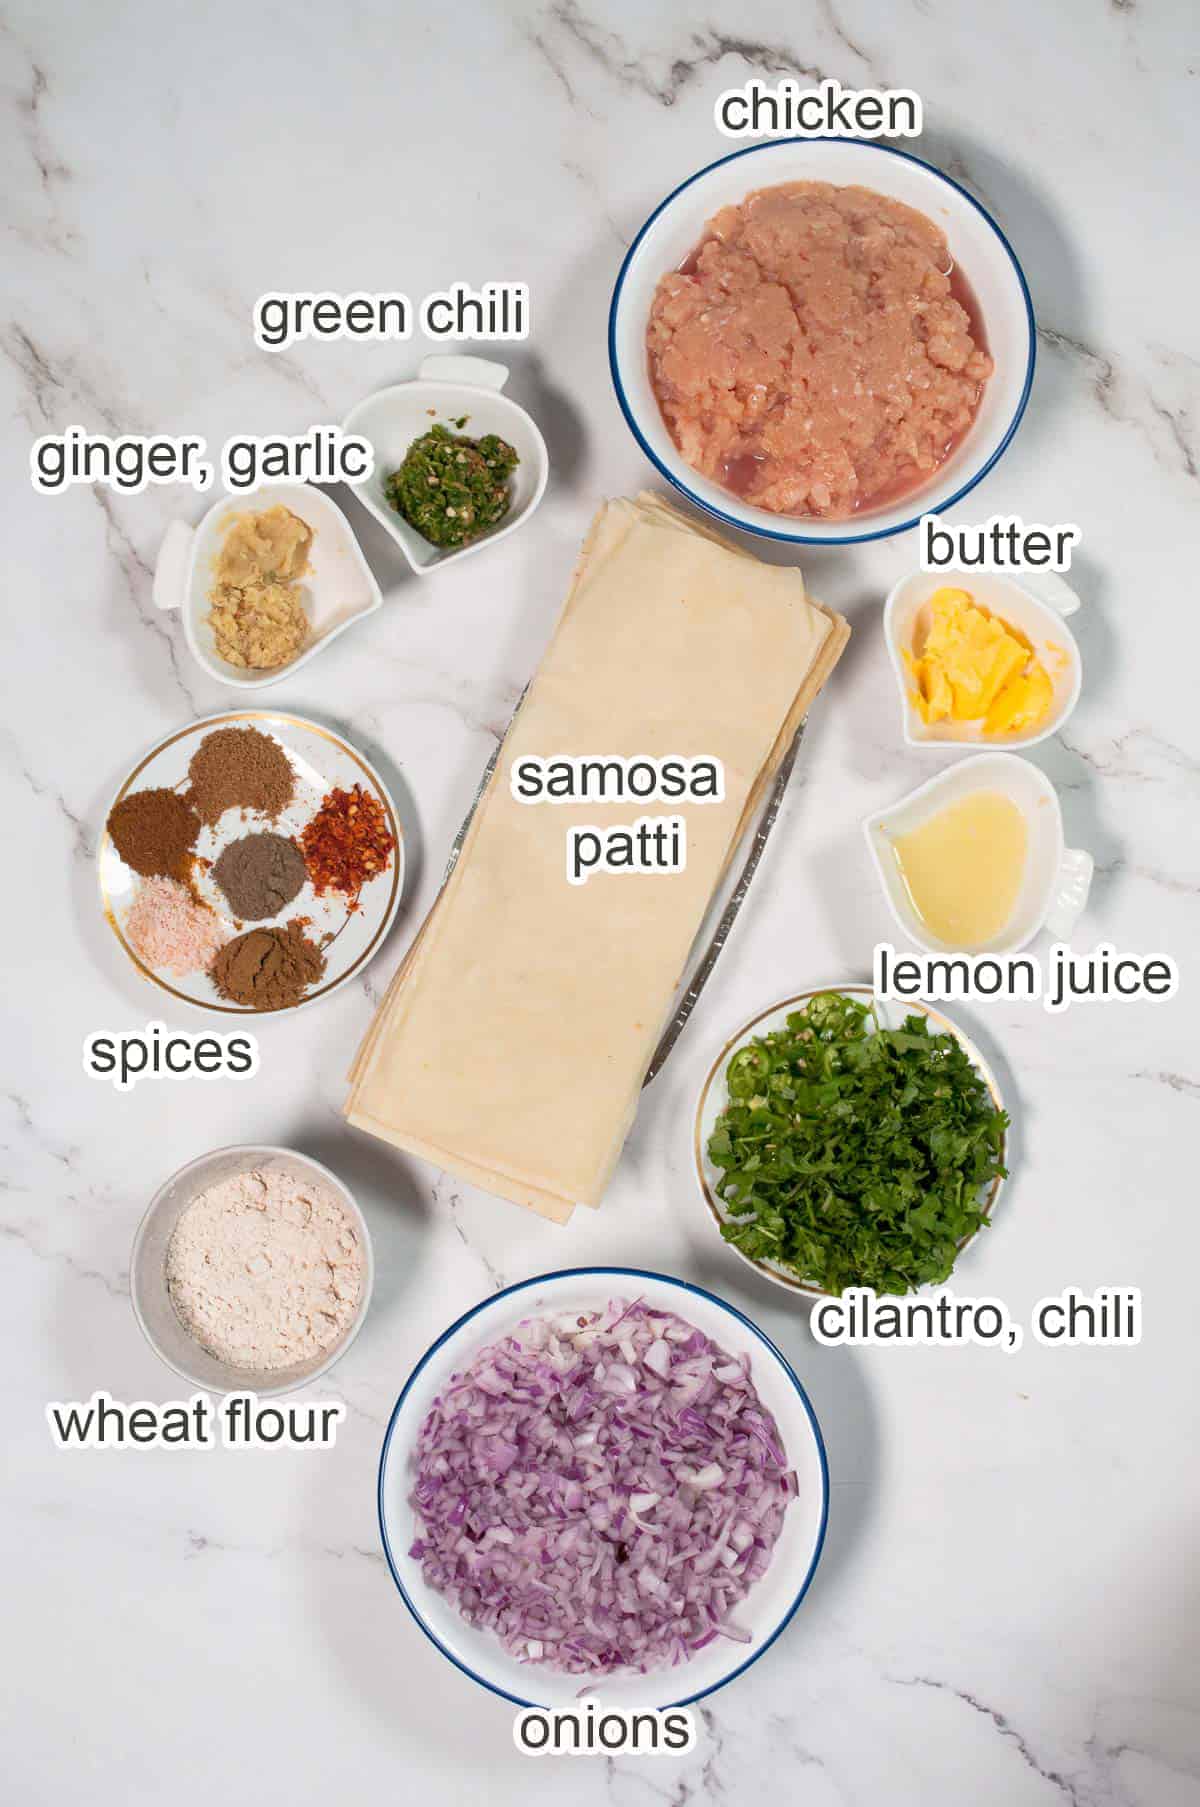 Ingredients of chicken samosa on the white background.